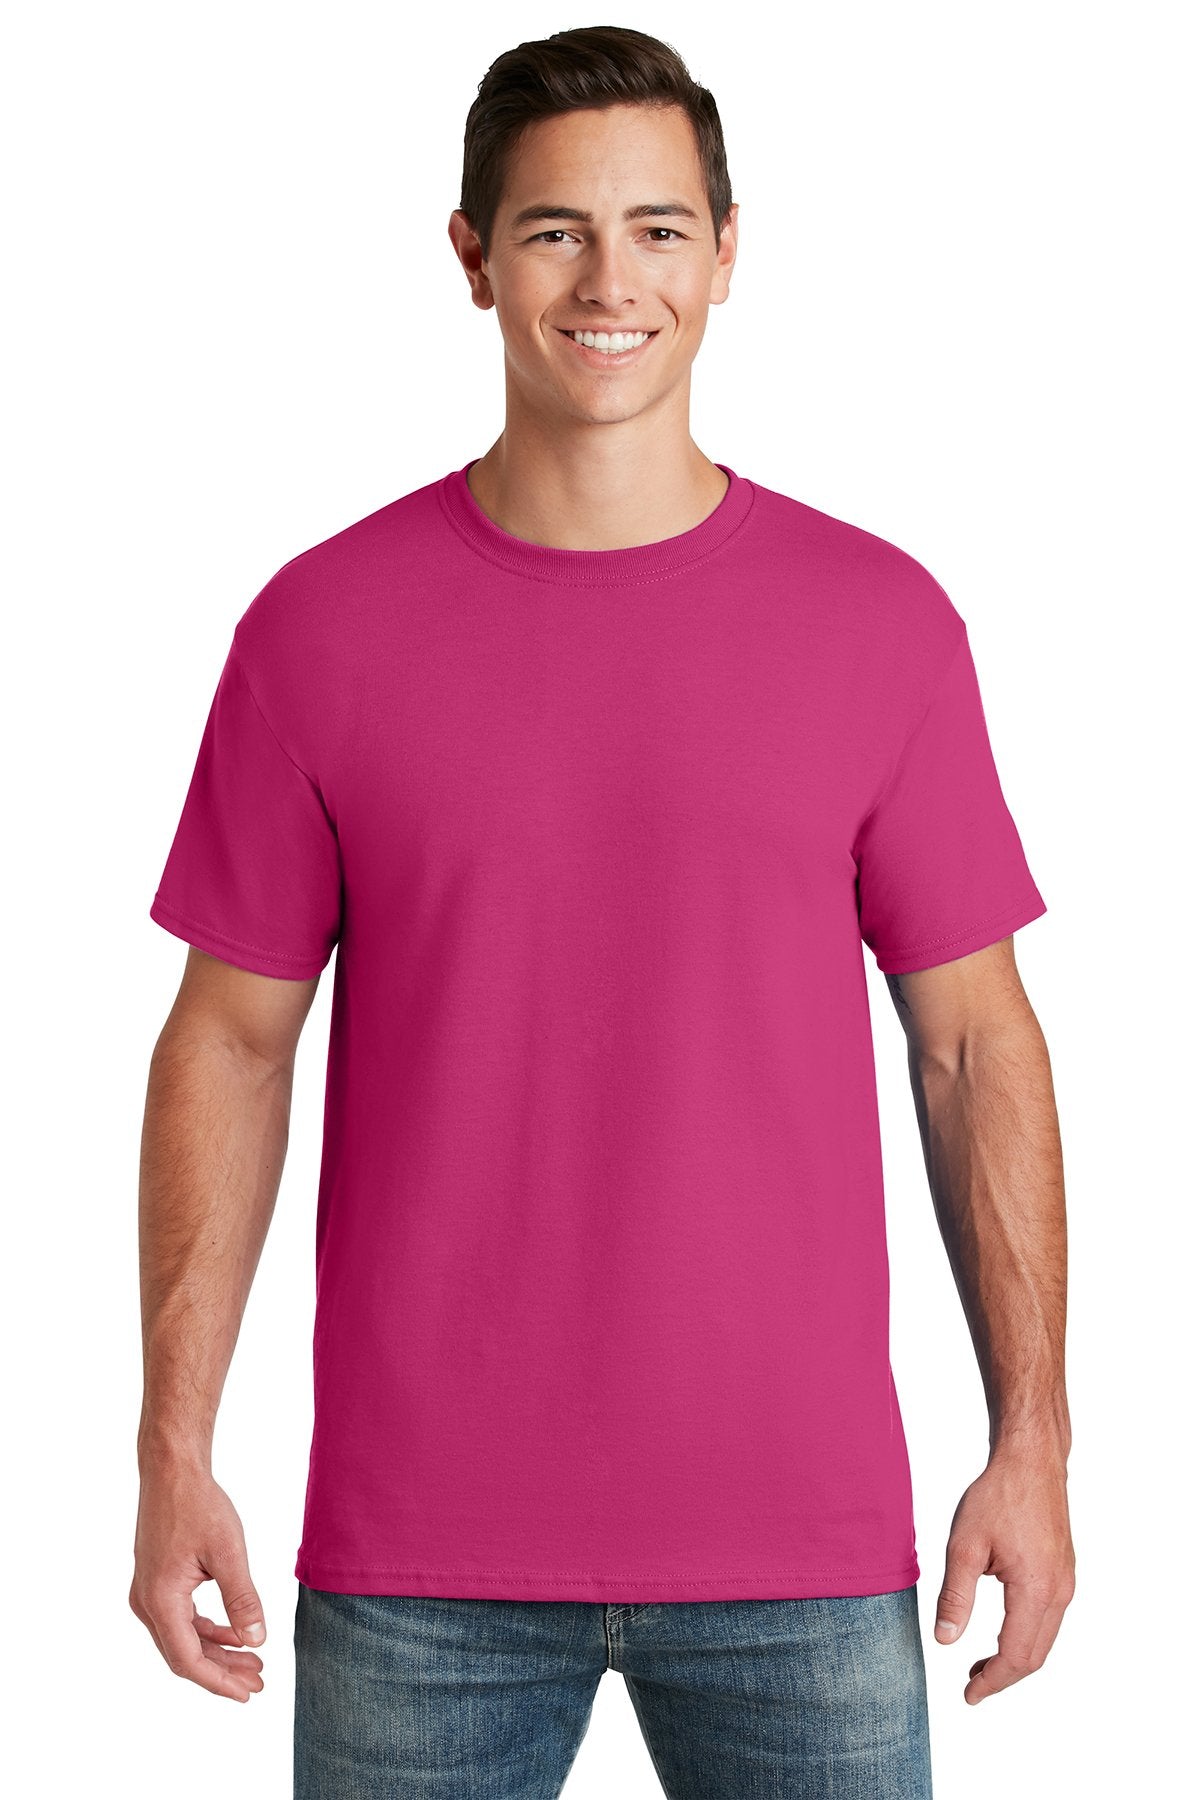 jerzees dri-power active 50/50 cotton/poly t-shirt 29m cyber pink